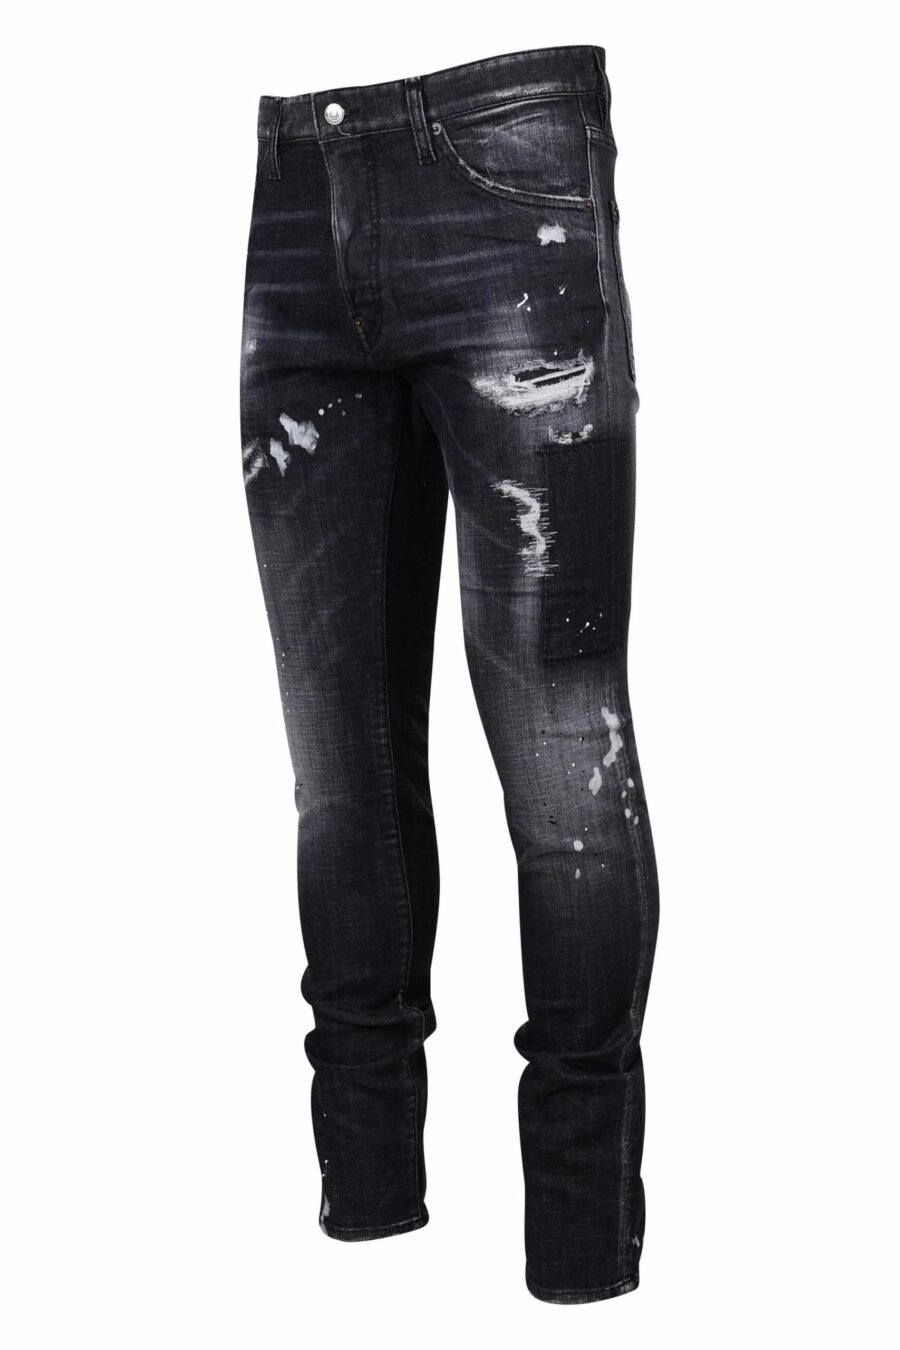 Black "cool guy jean" jeans with rips and frayed - 8054148300753 1 scaled